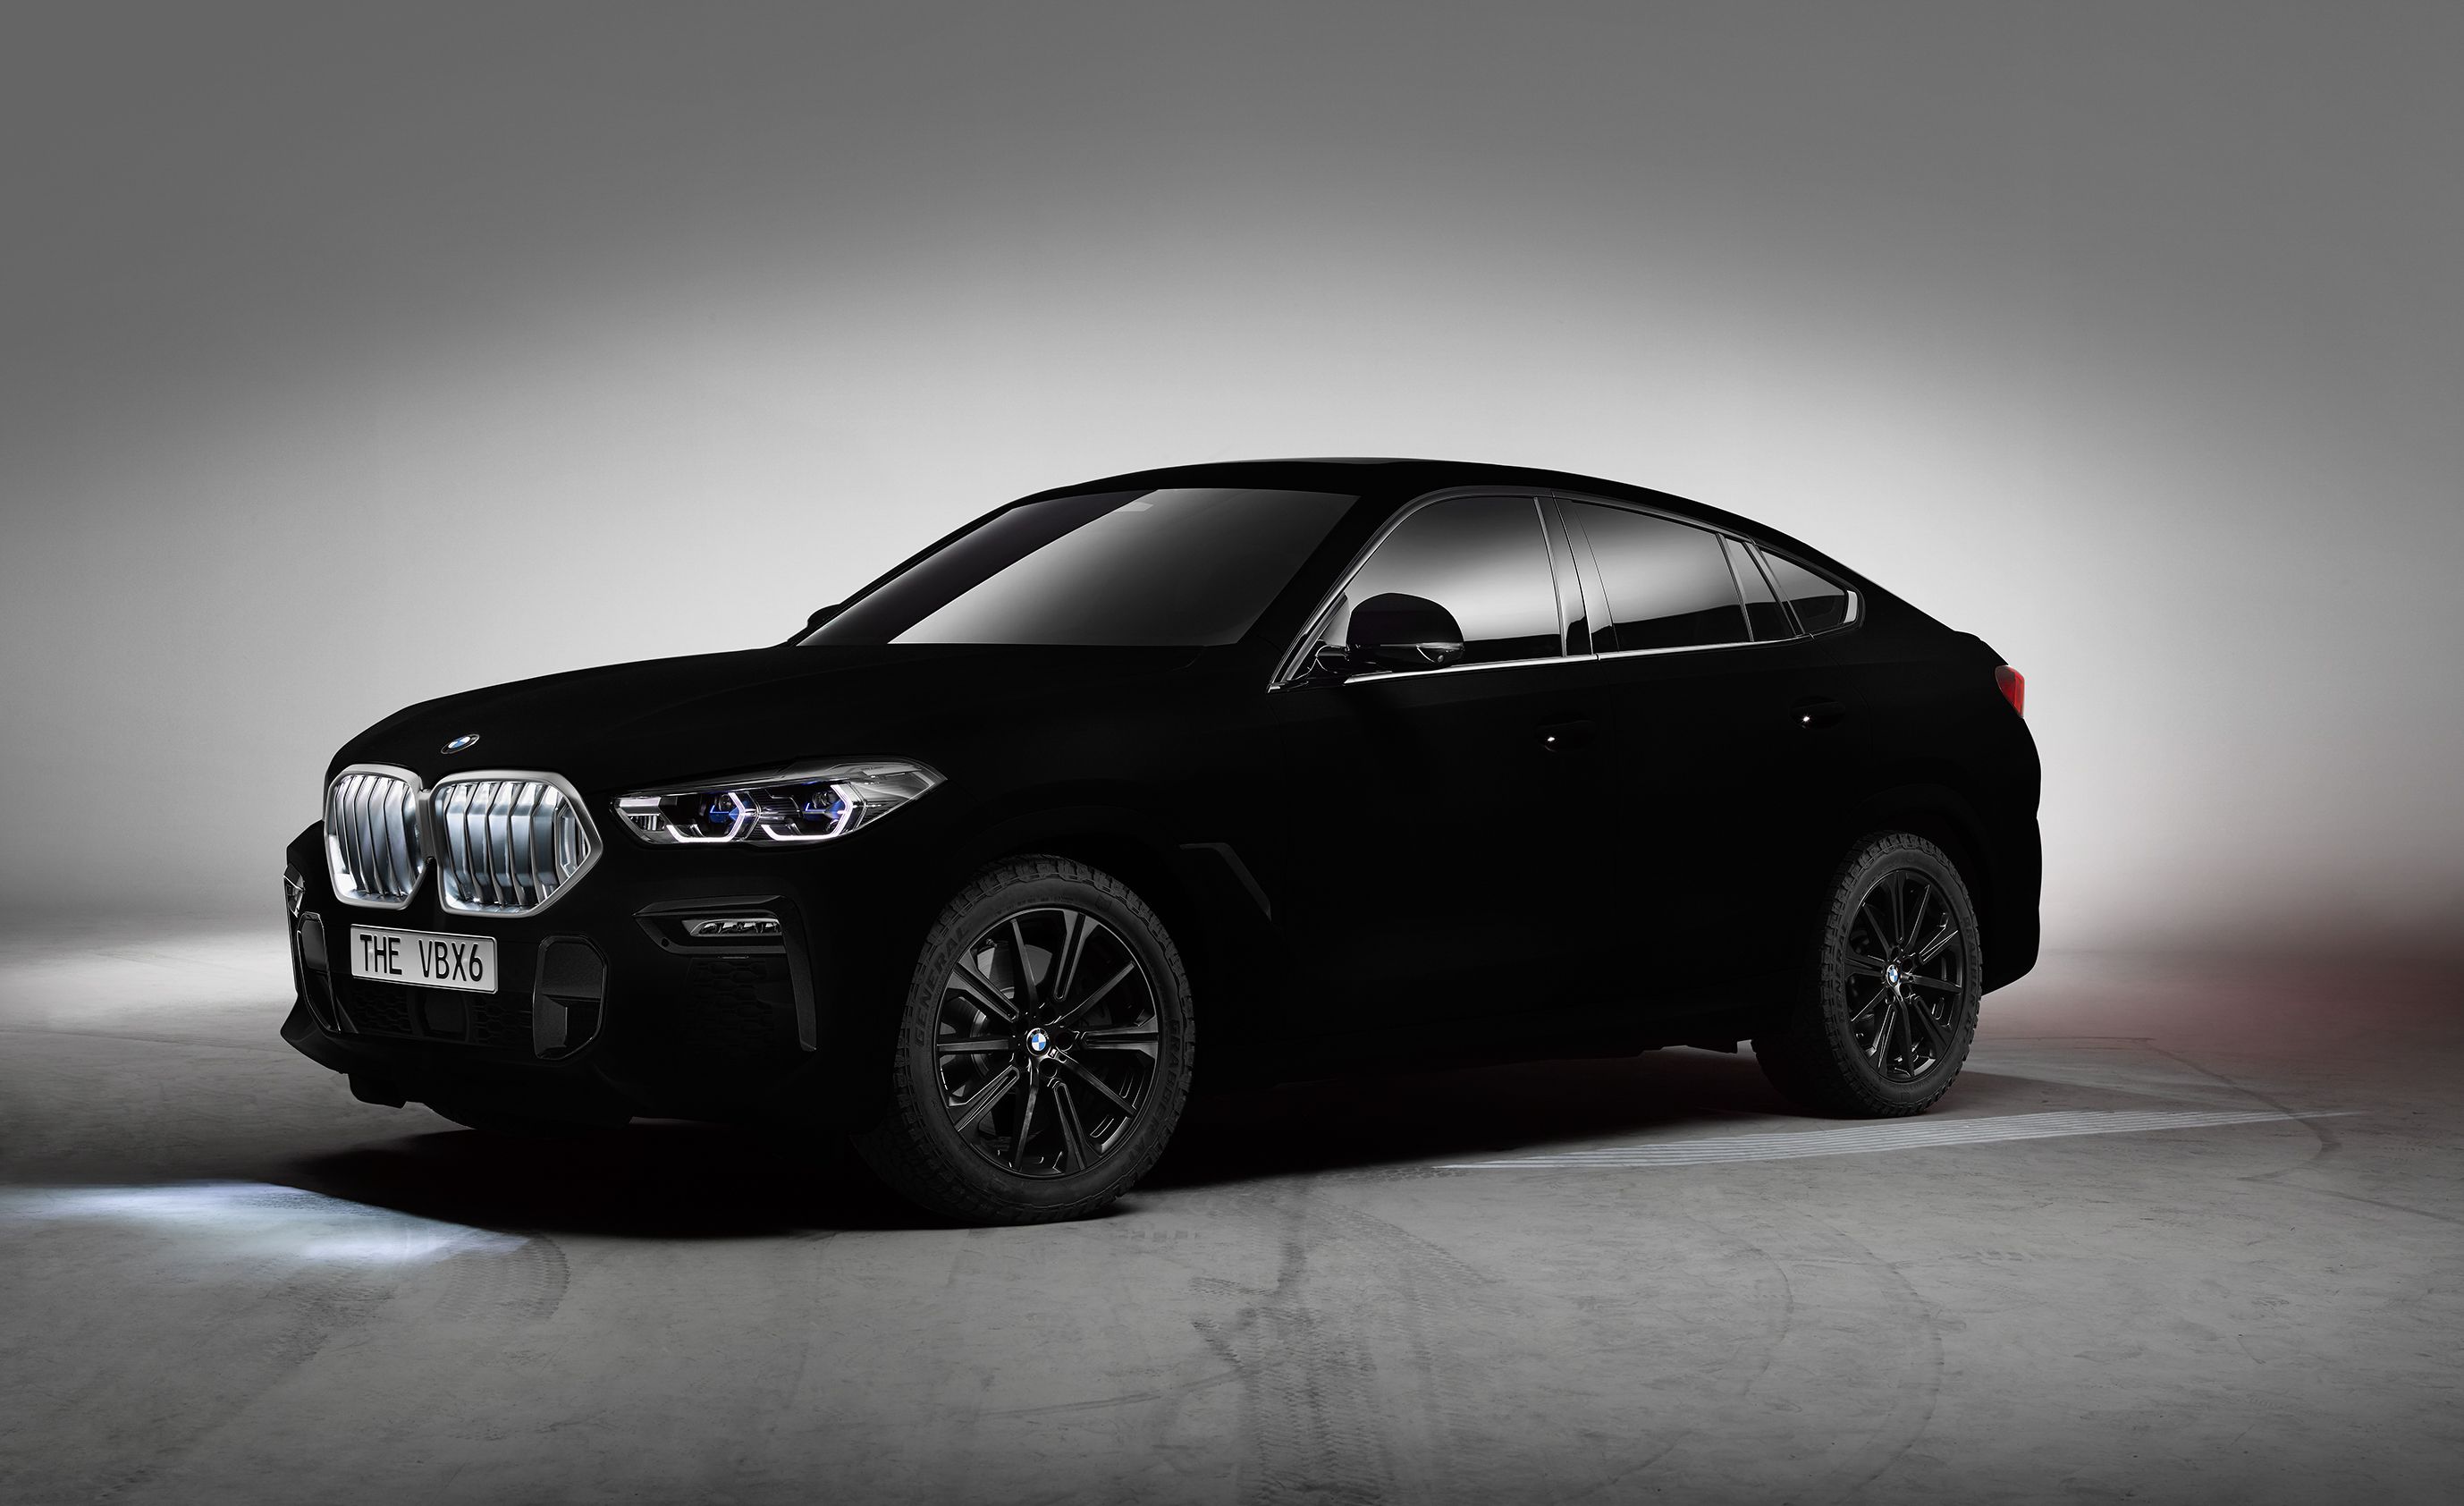 BMW X6 Gets a Blackest of Black Treatment with Paint That Eats Light